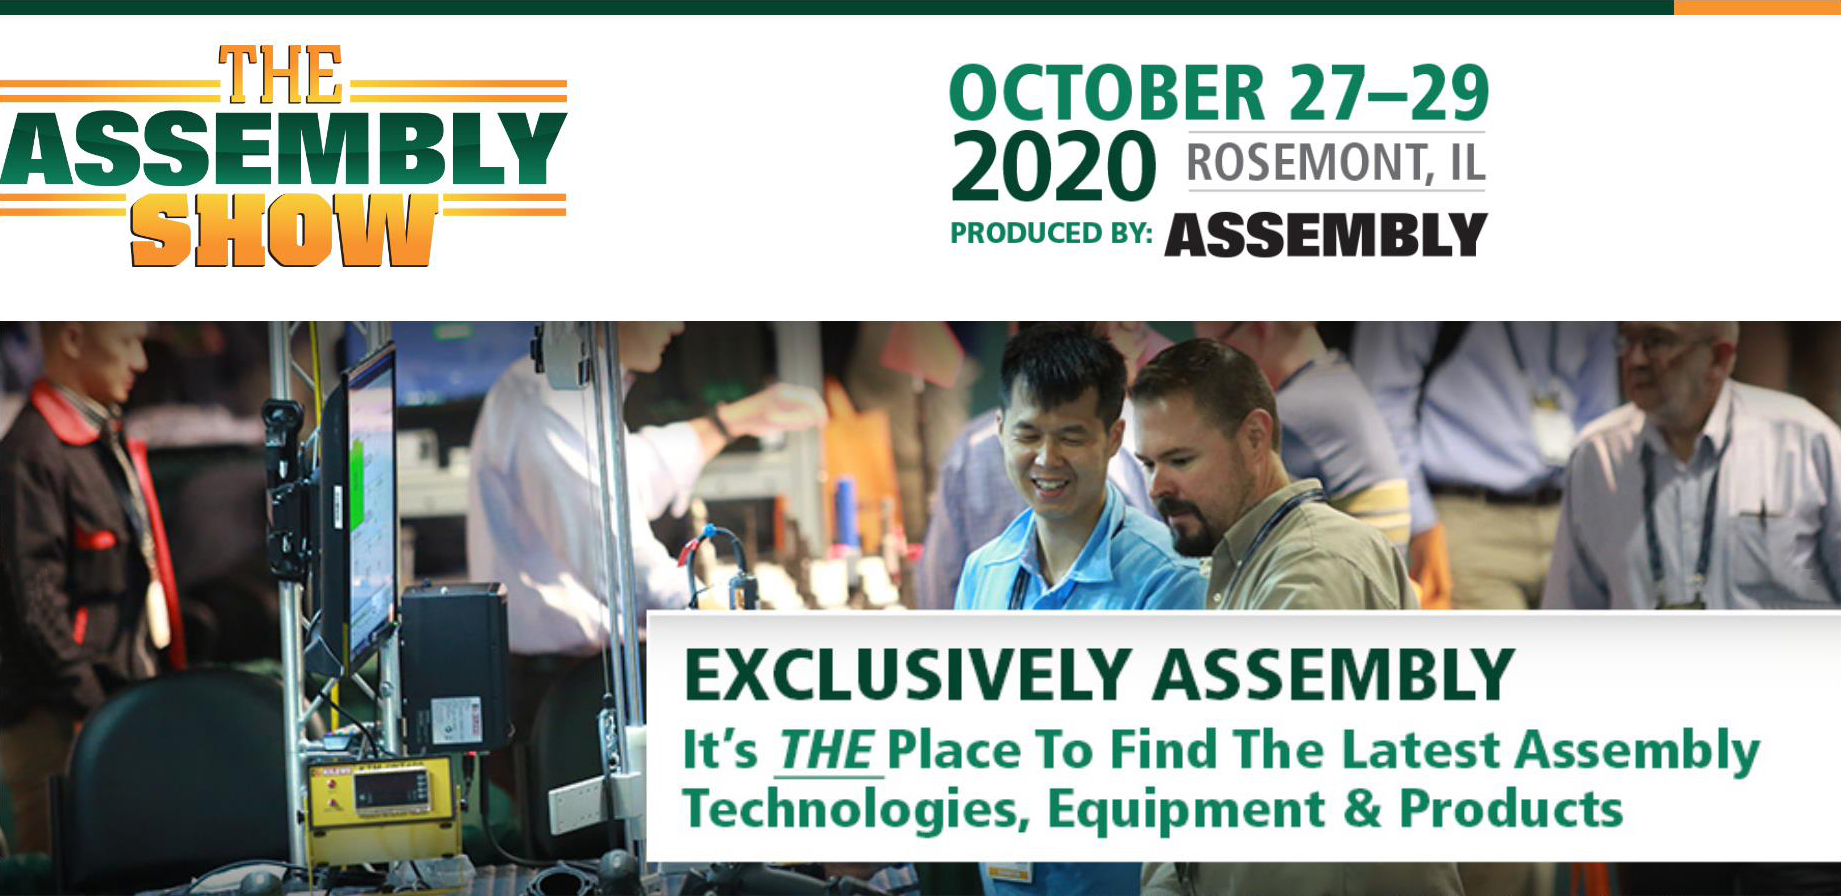 Optima will attend the 8th Assembly Show taking place on October 27-29, 2020